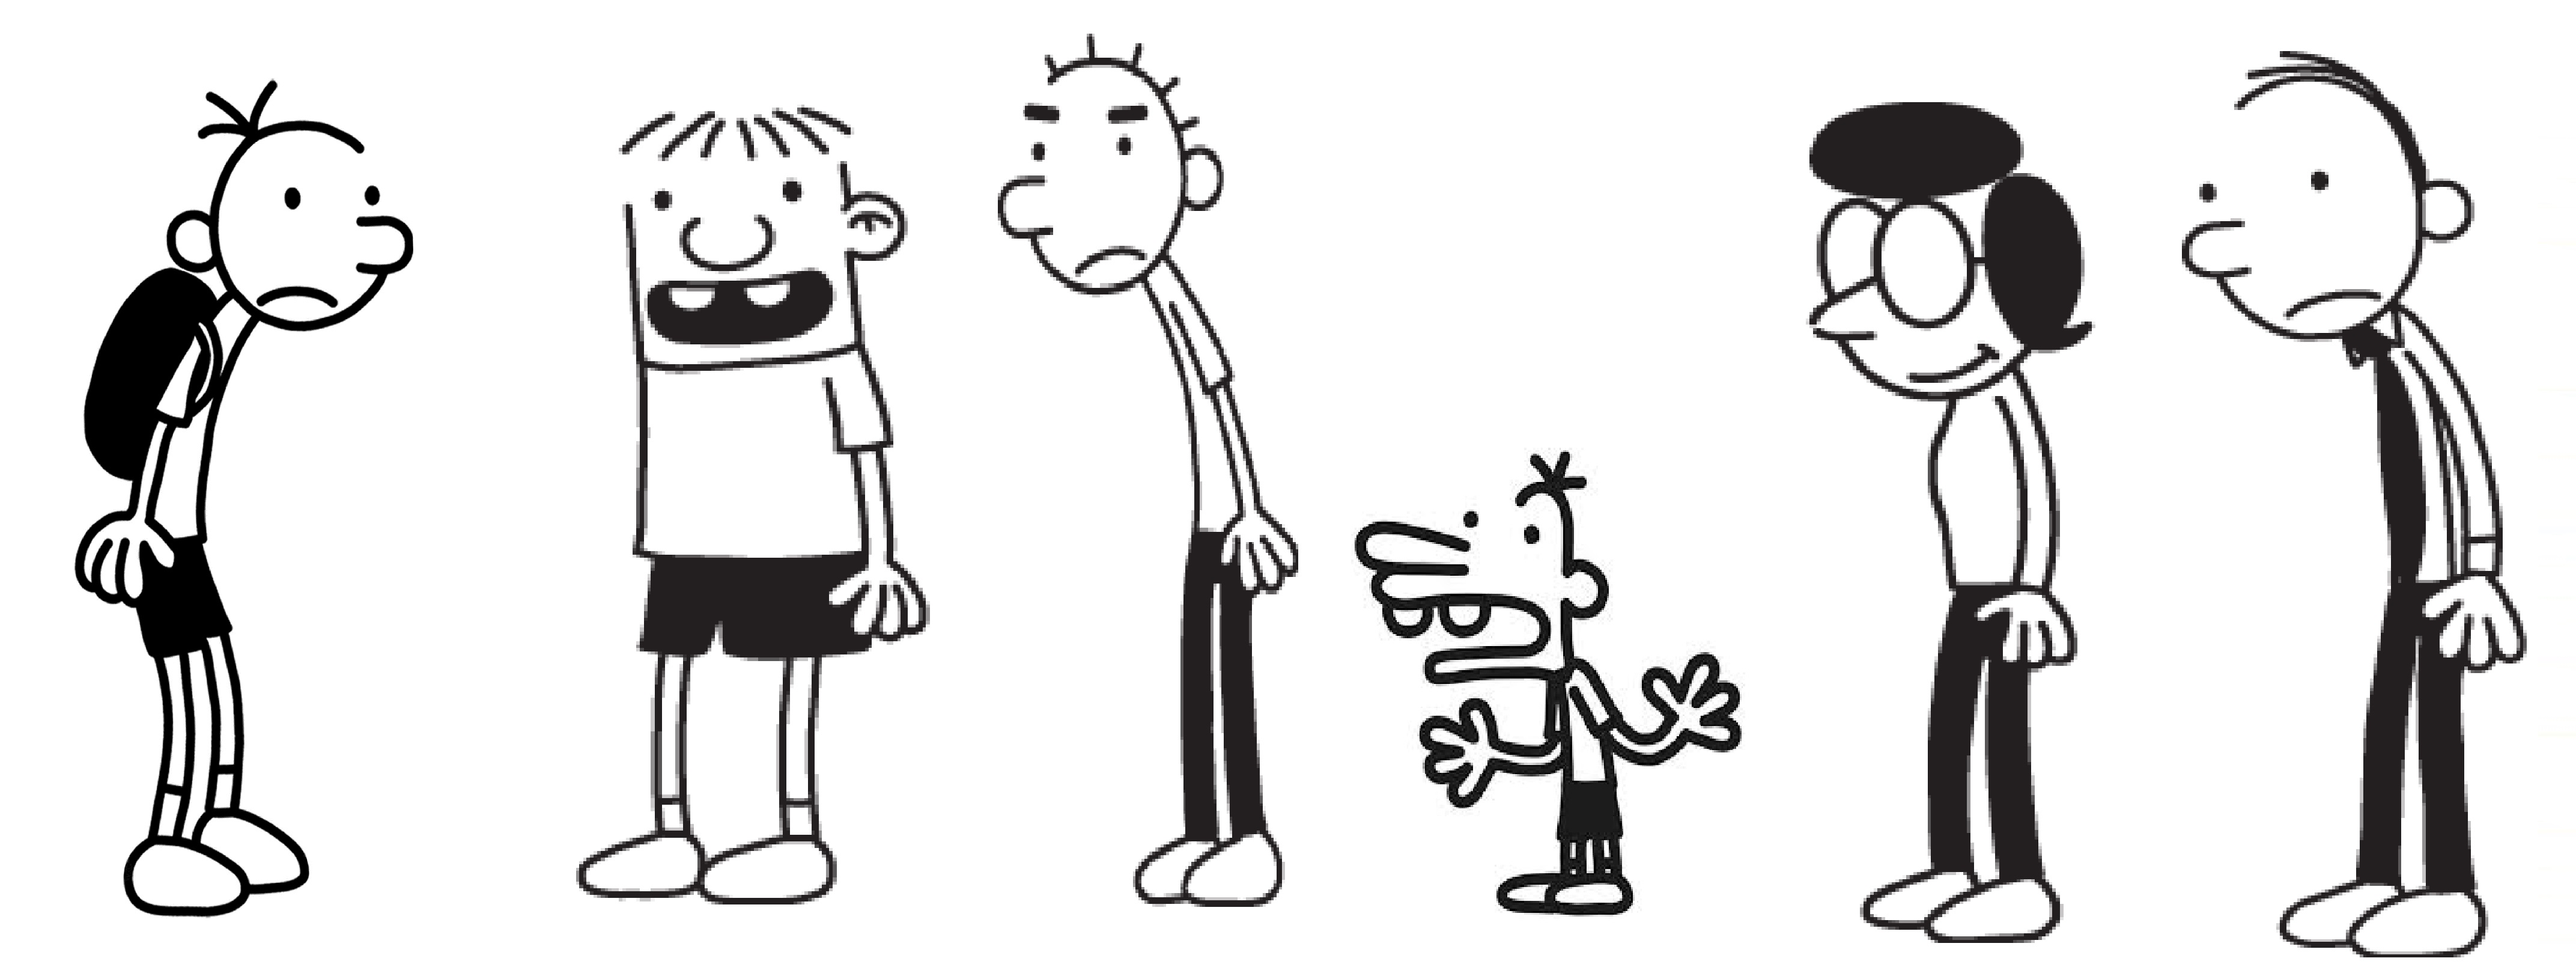  Diary Of A Wimpy Kid Coloring Pages Free with simple drawing